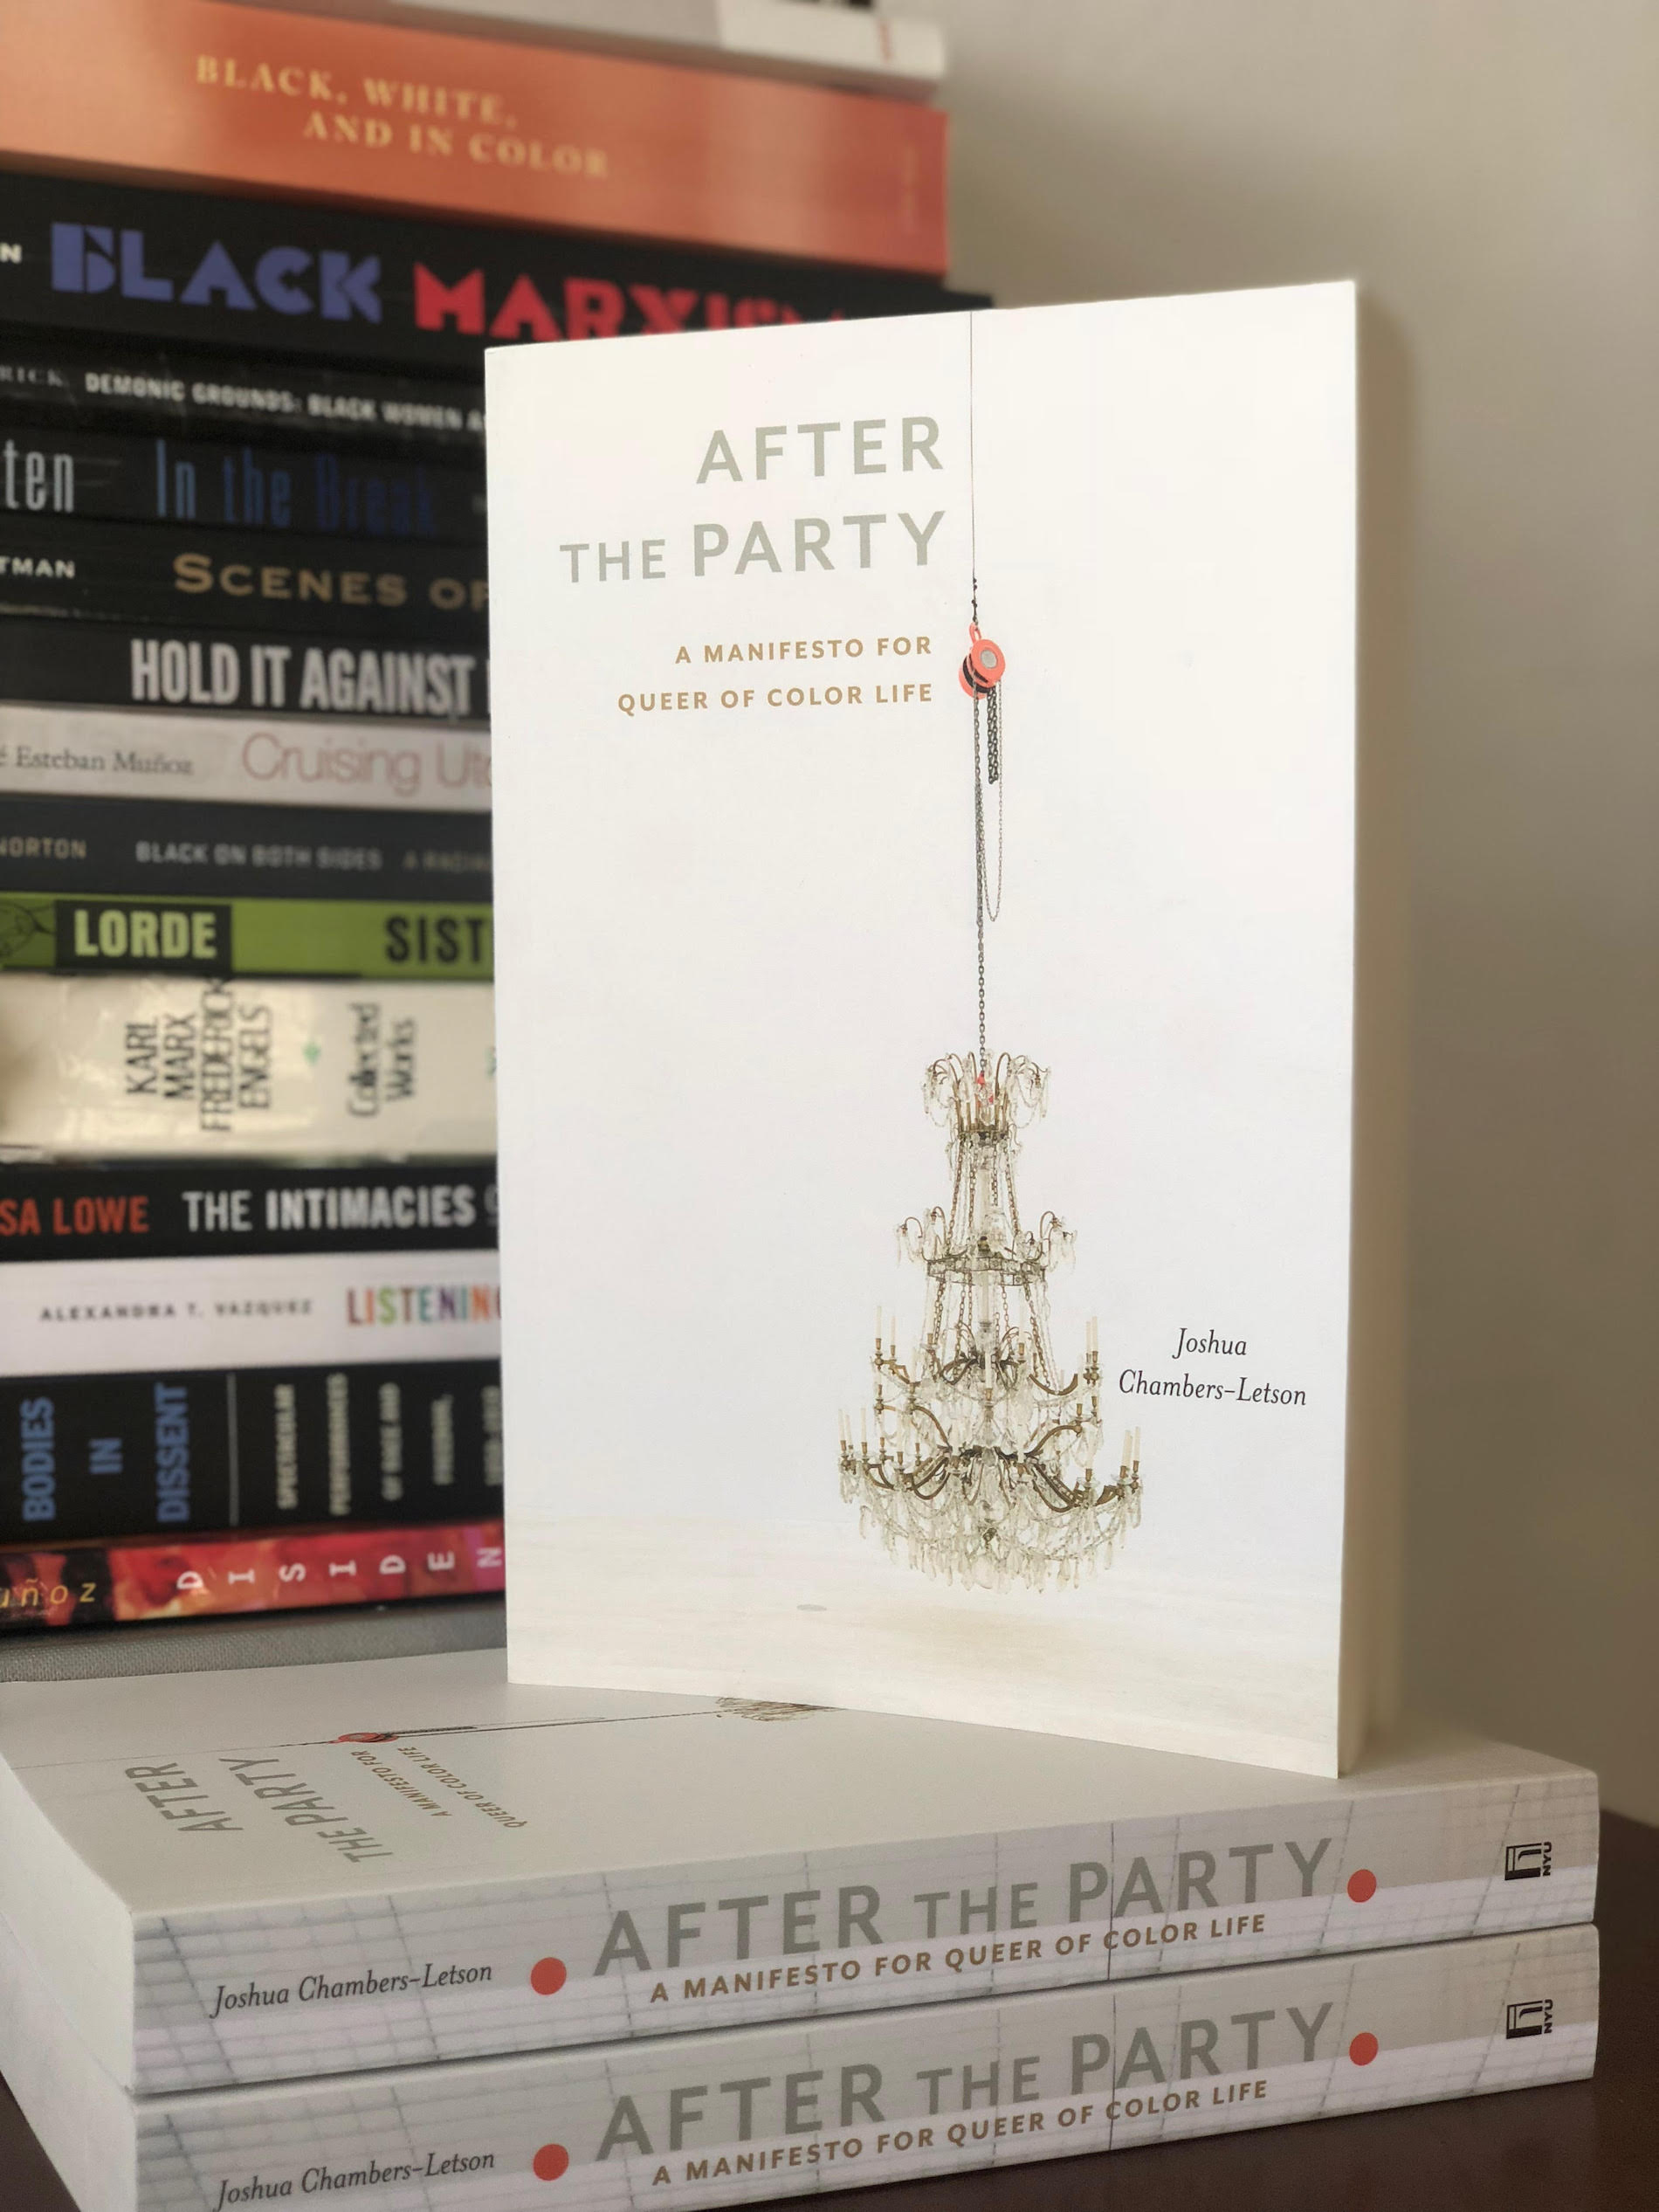 "After the Party: A Manifesto for Queer of Color Life" by Joshua Chambers-Letson